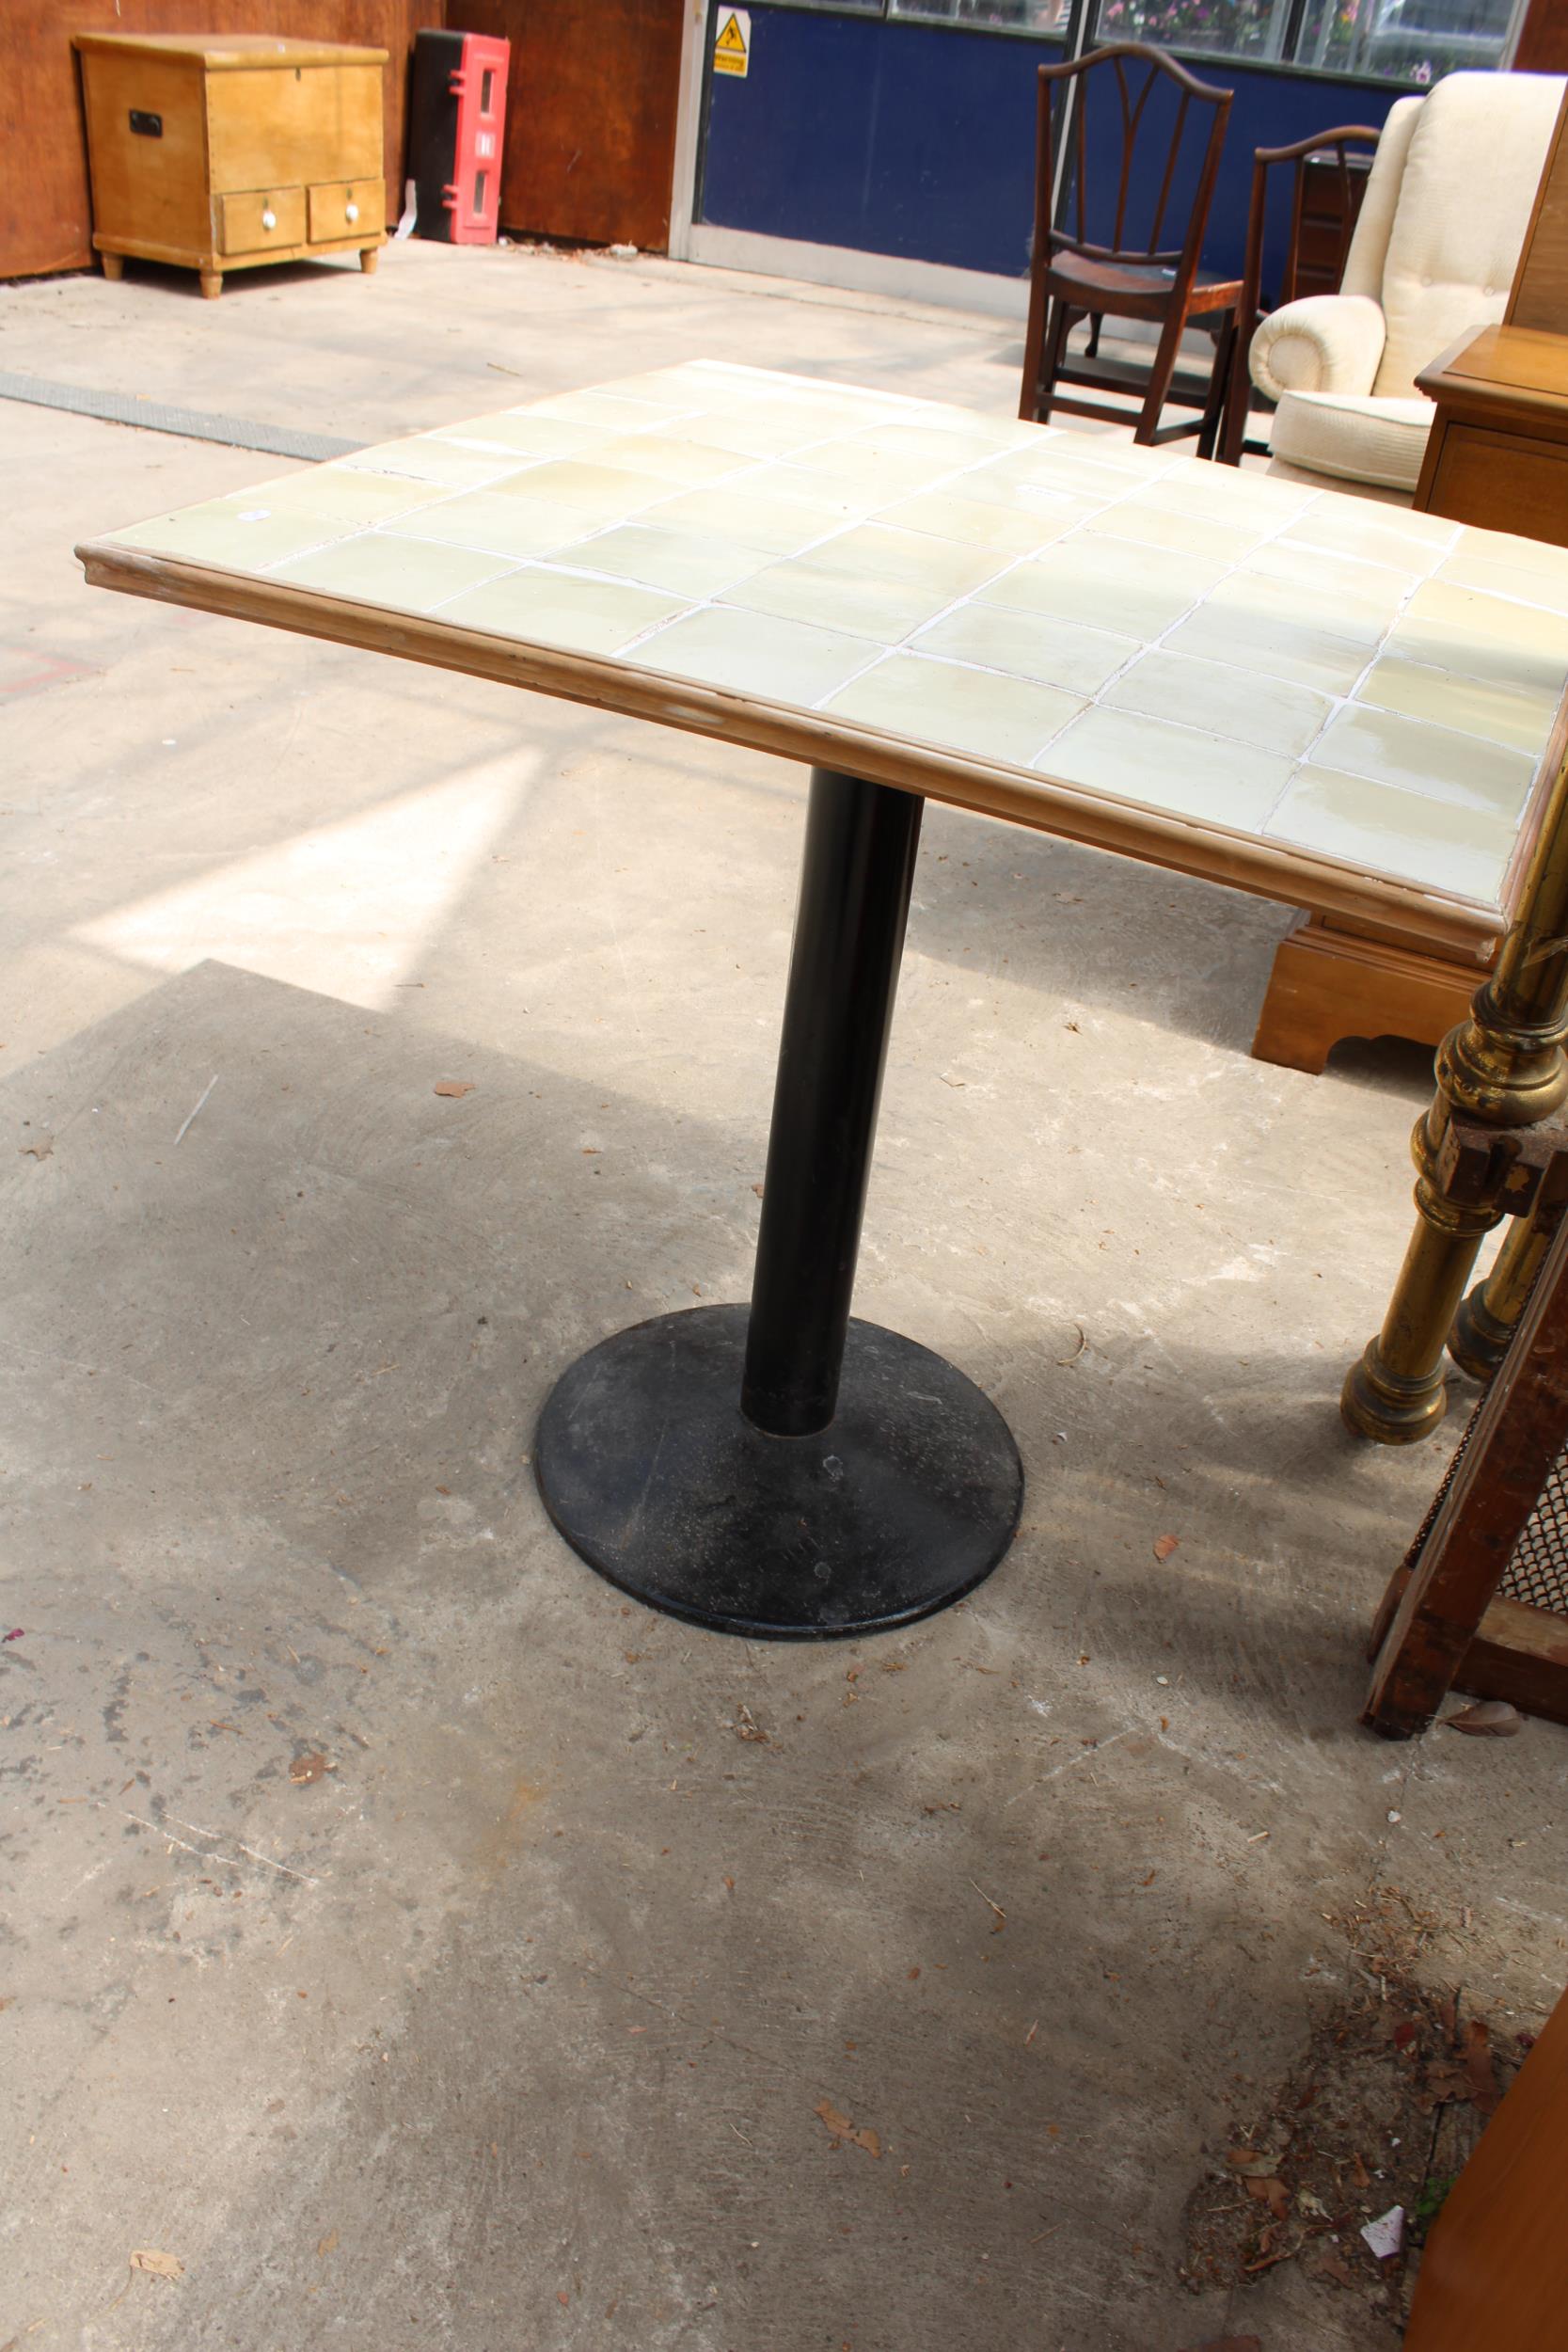 A MODERN 30" SQUARE TILED TOP TABLE ON METALWORK BASE - Image 2 of 3